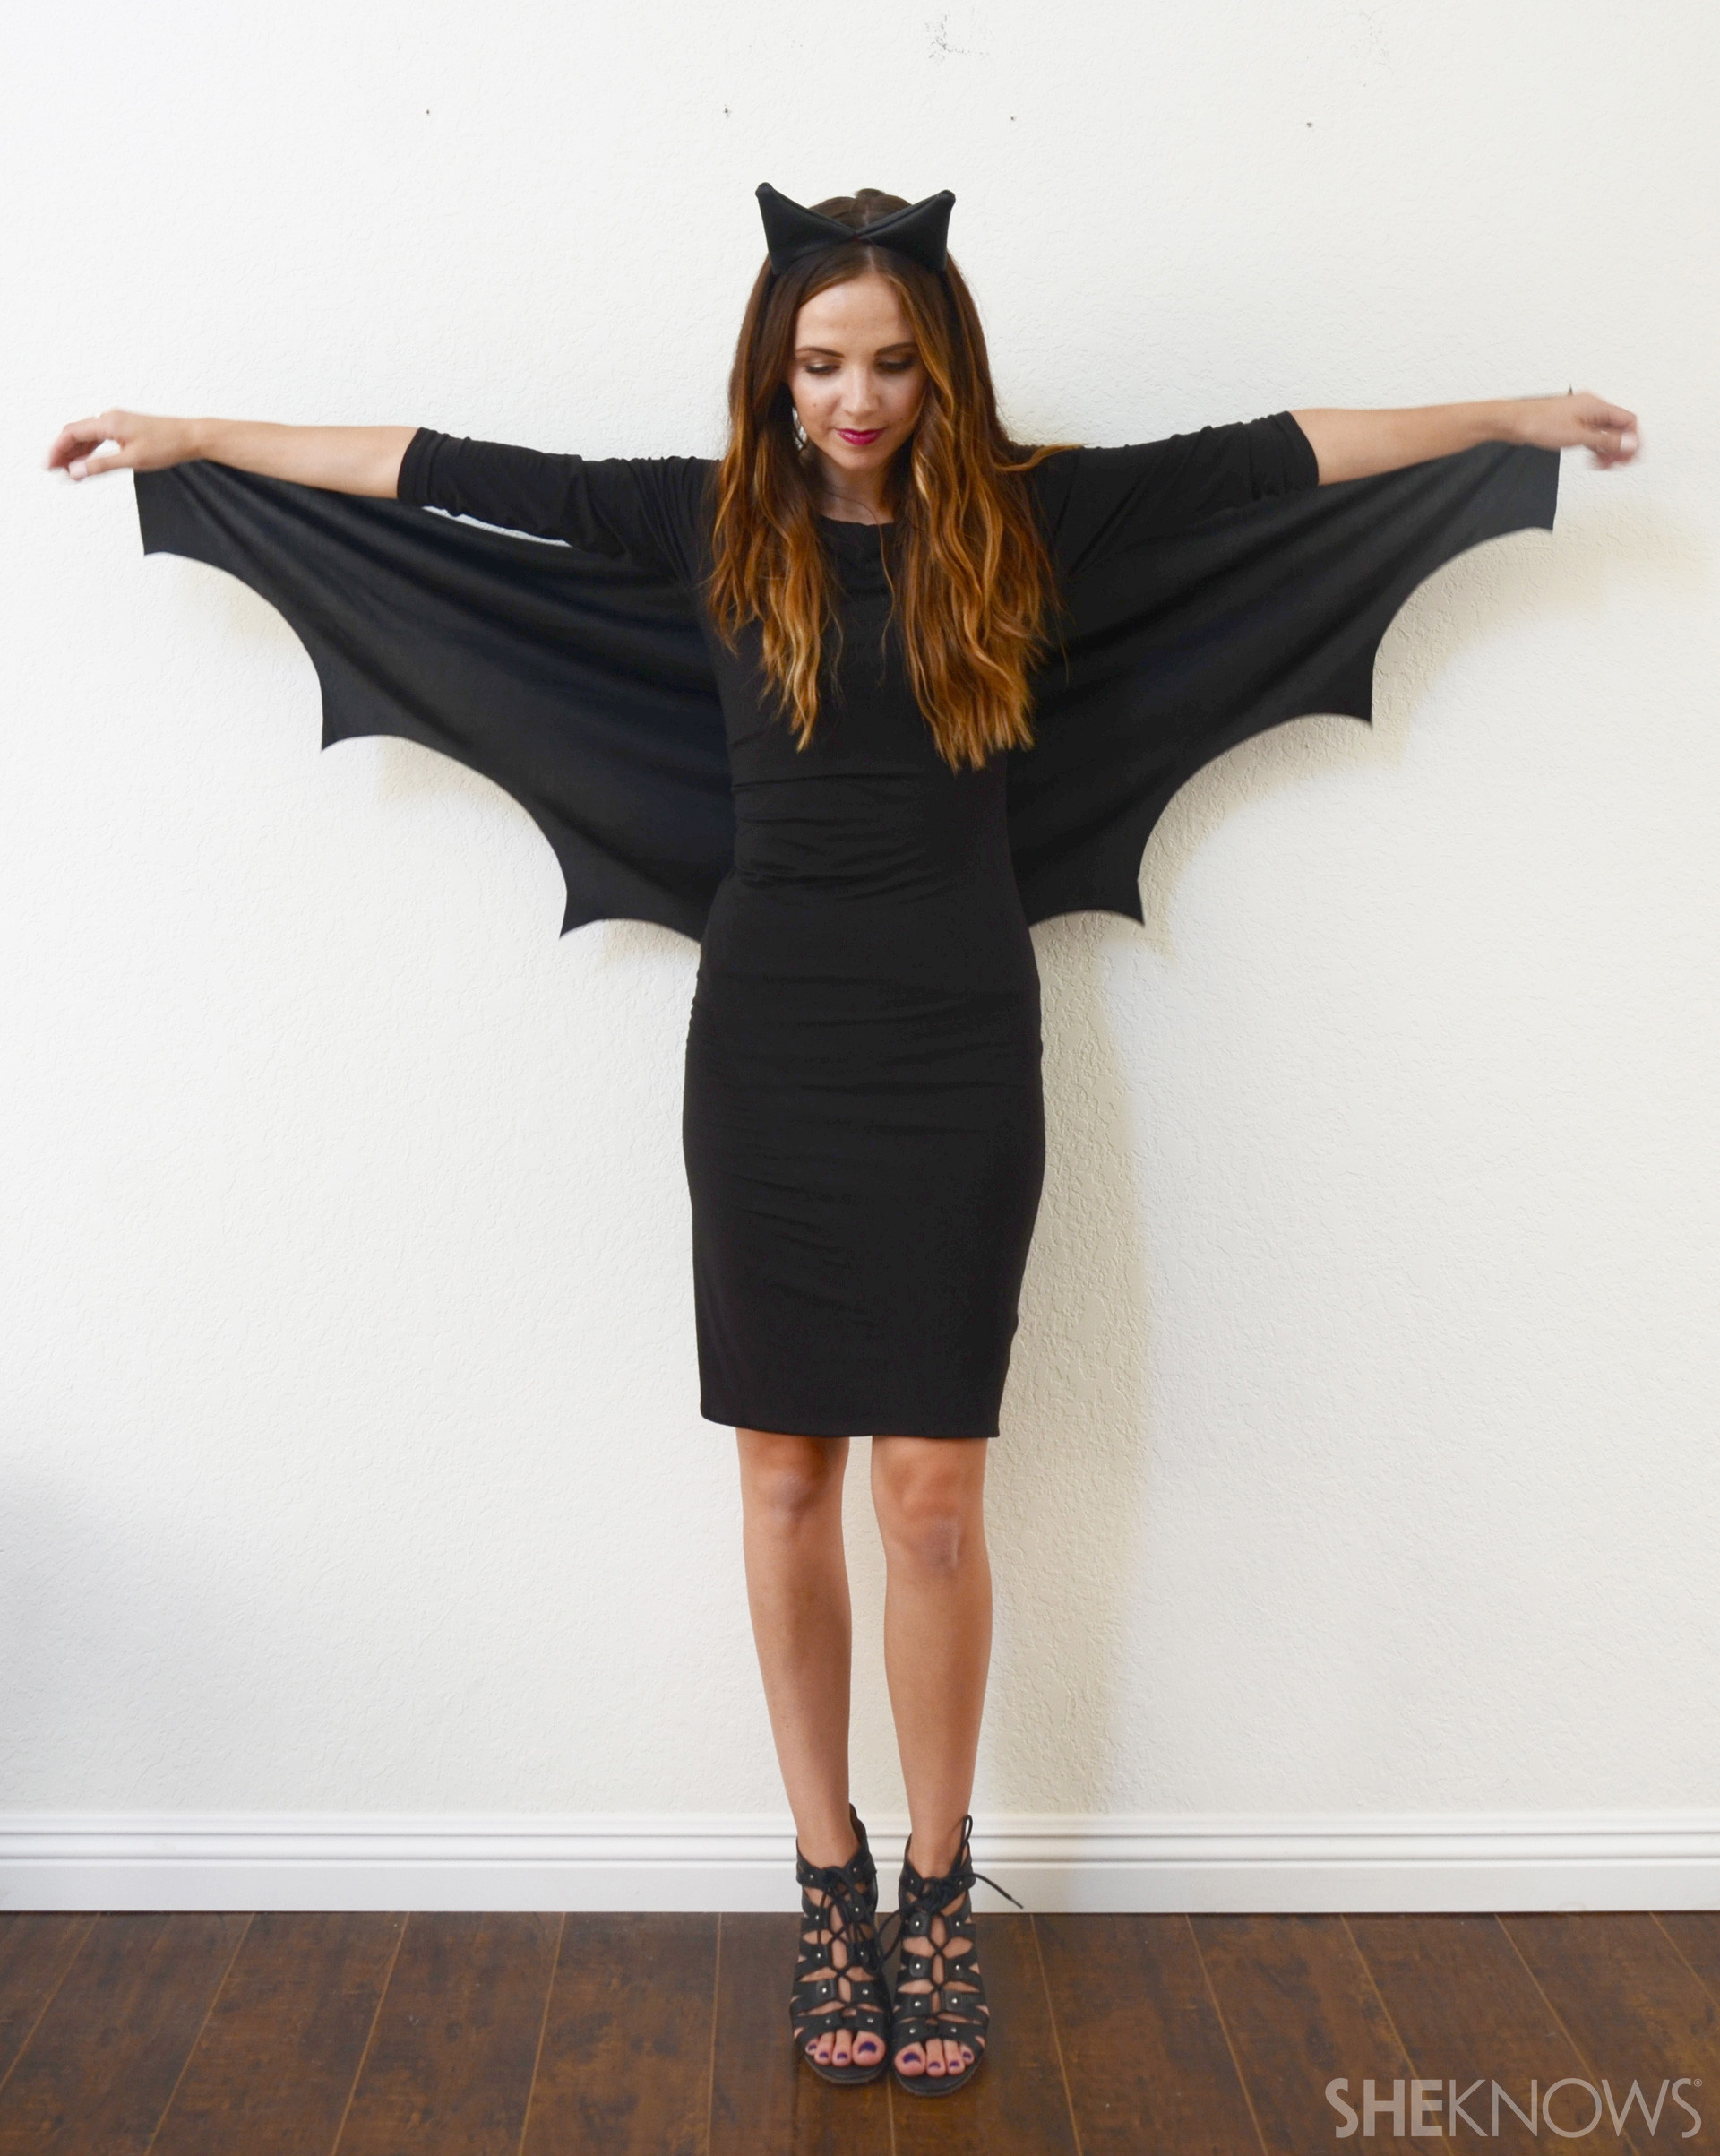 Women DIY Costume Ideas
 A DIY Bat Costume so Easy No e Will Know It ly Took 10